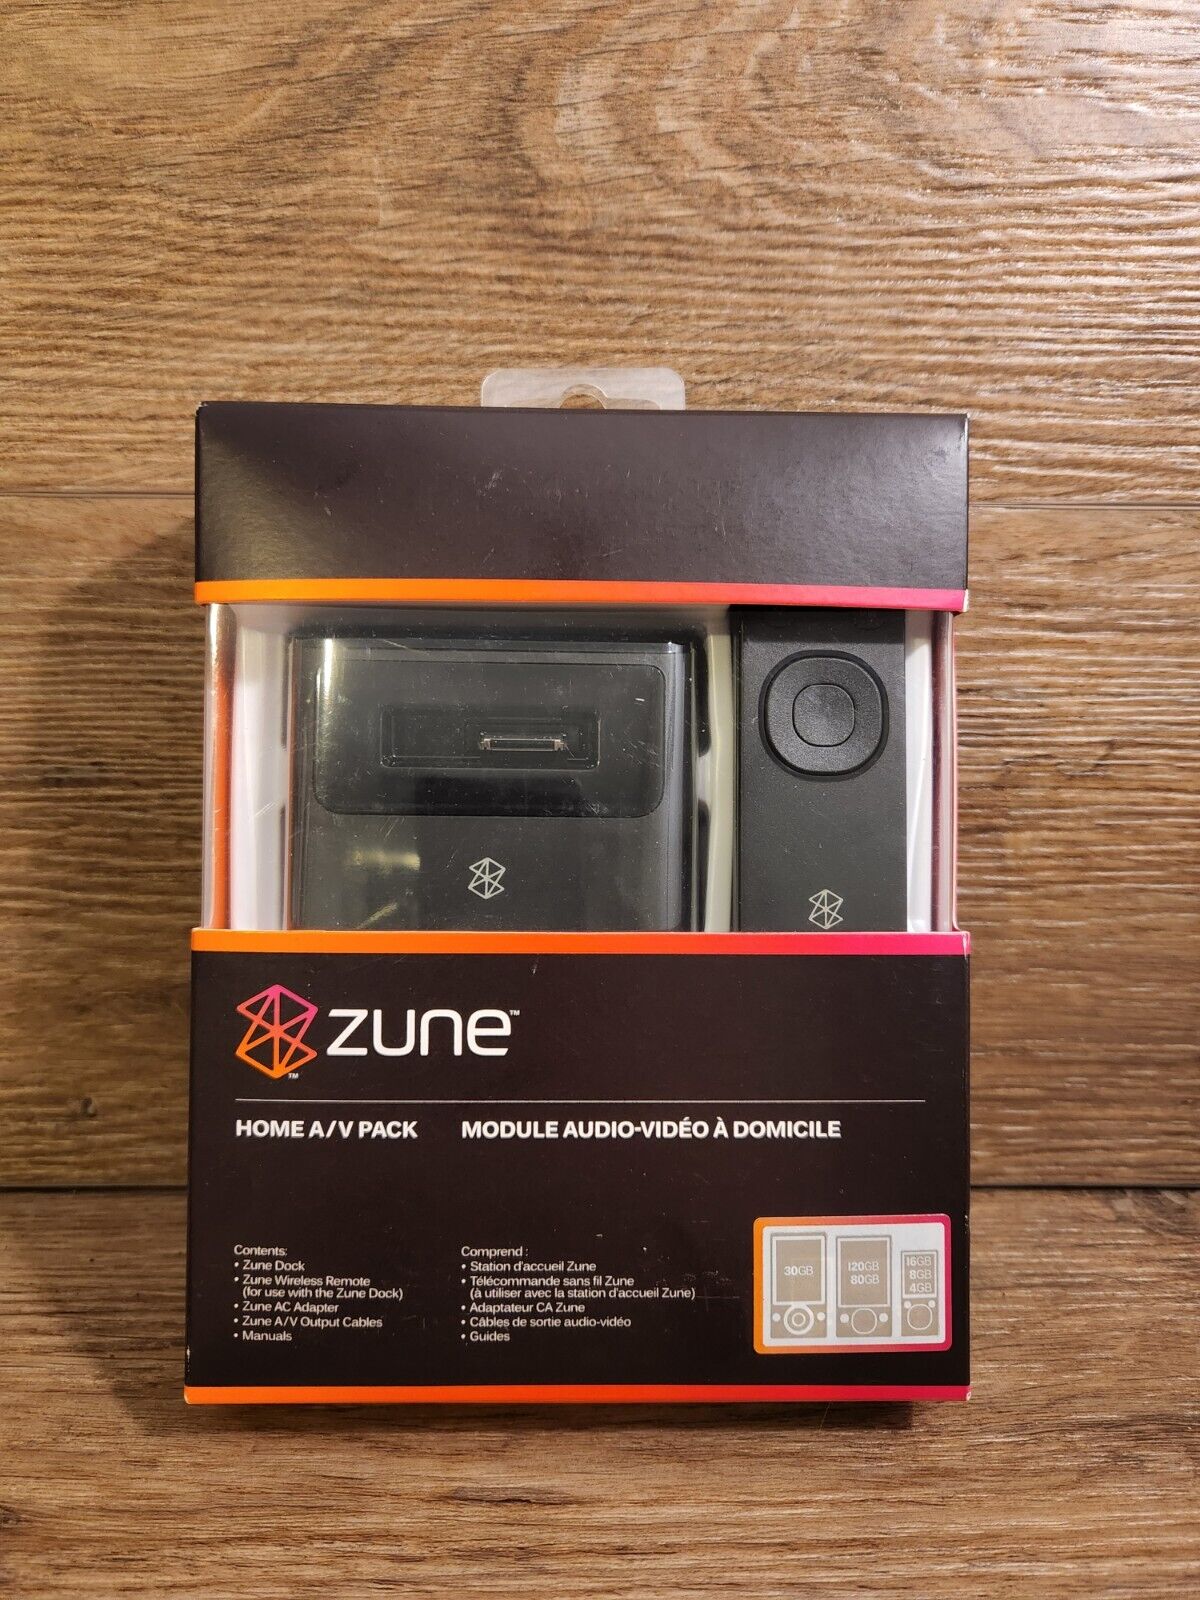 Zune Home A/v Pack - Dock, Remote, Ac Adapter & A/v Cables